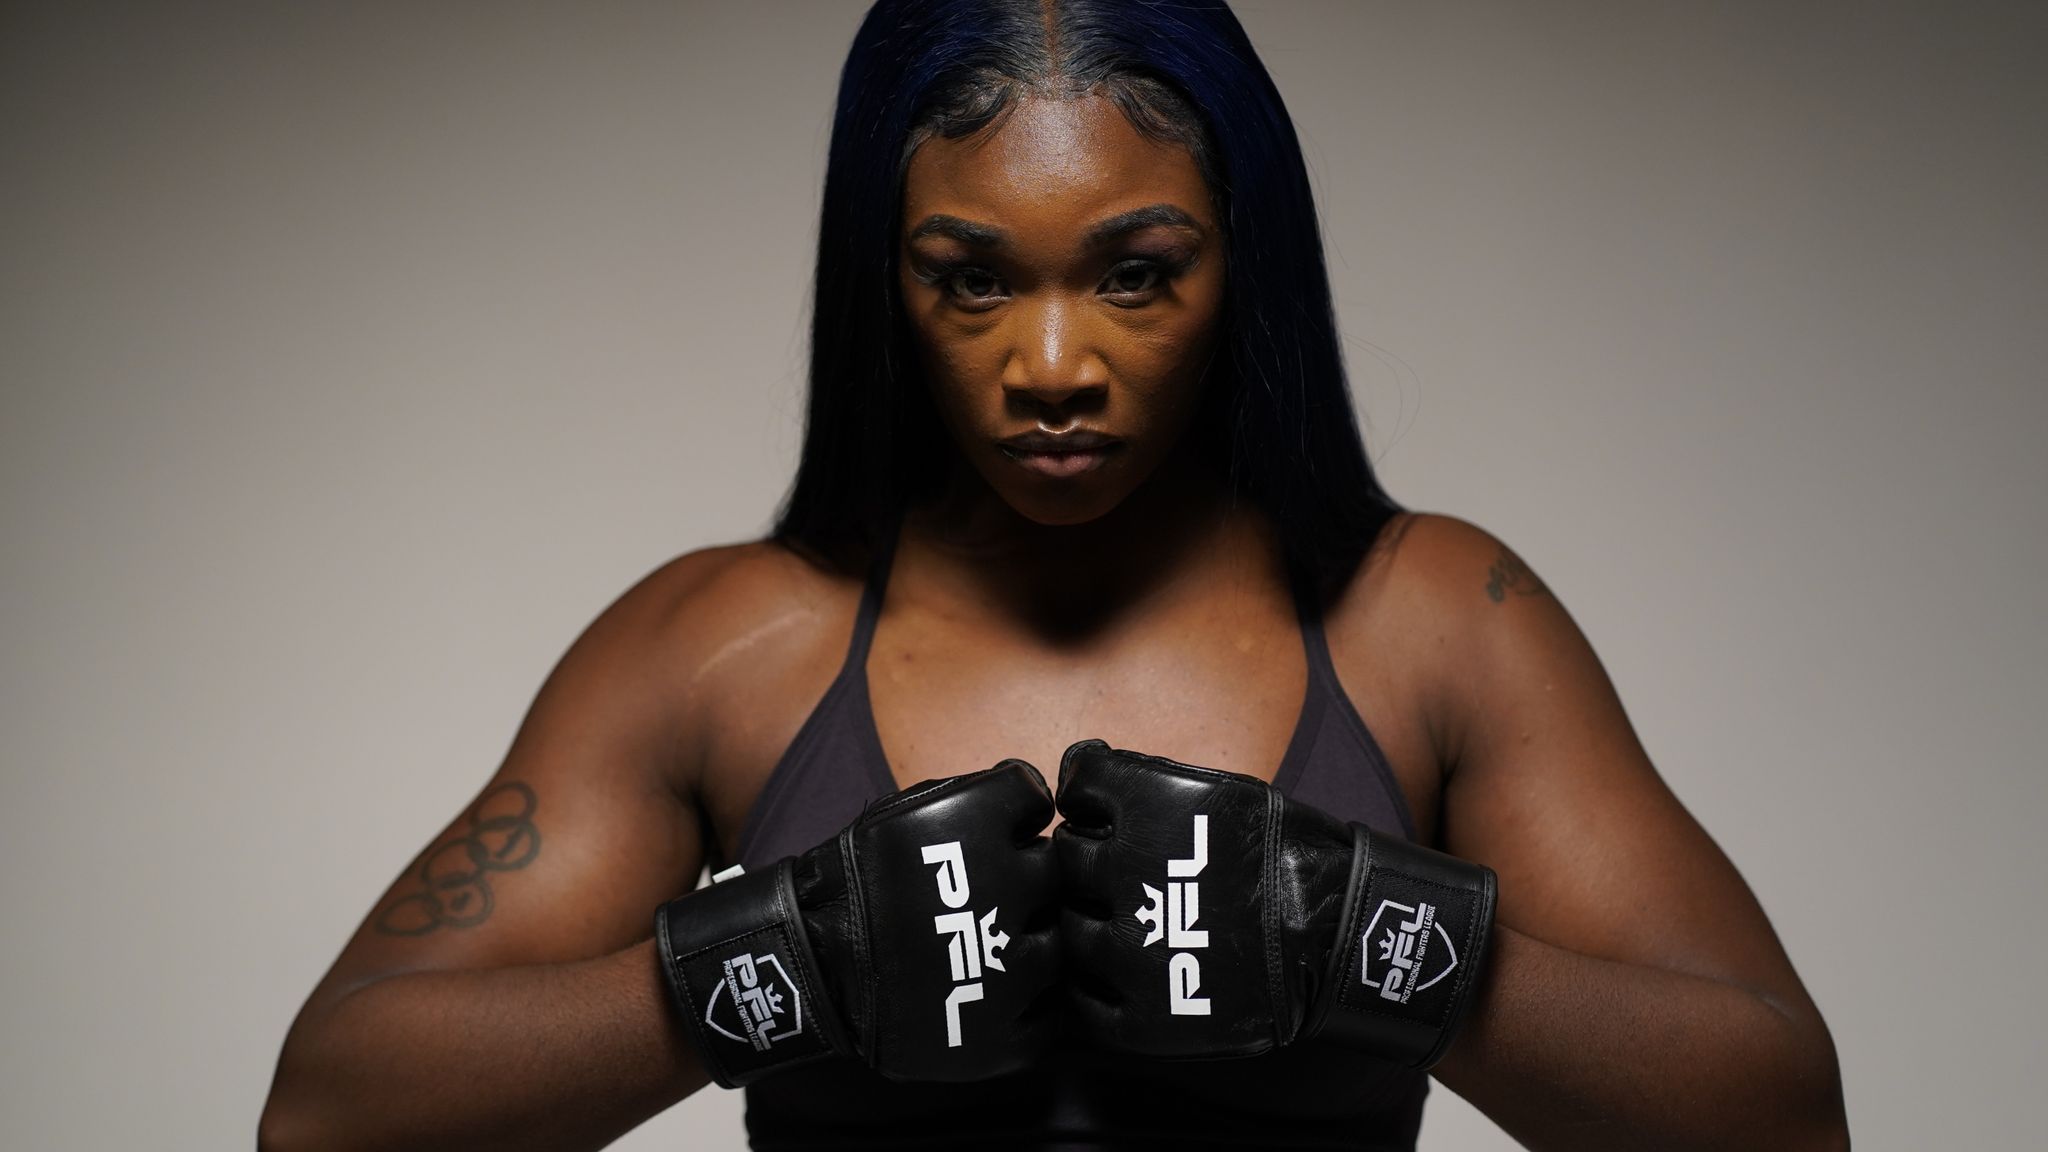 Claressa Shields Is Training With Holly Holm And Jon Jones Ahead Of Mma Debut With Professional